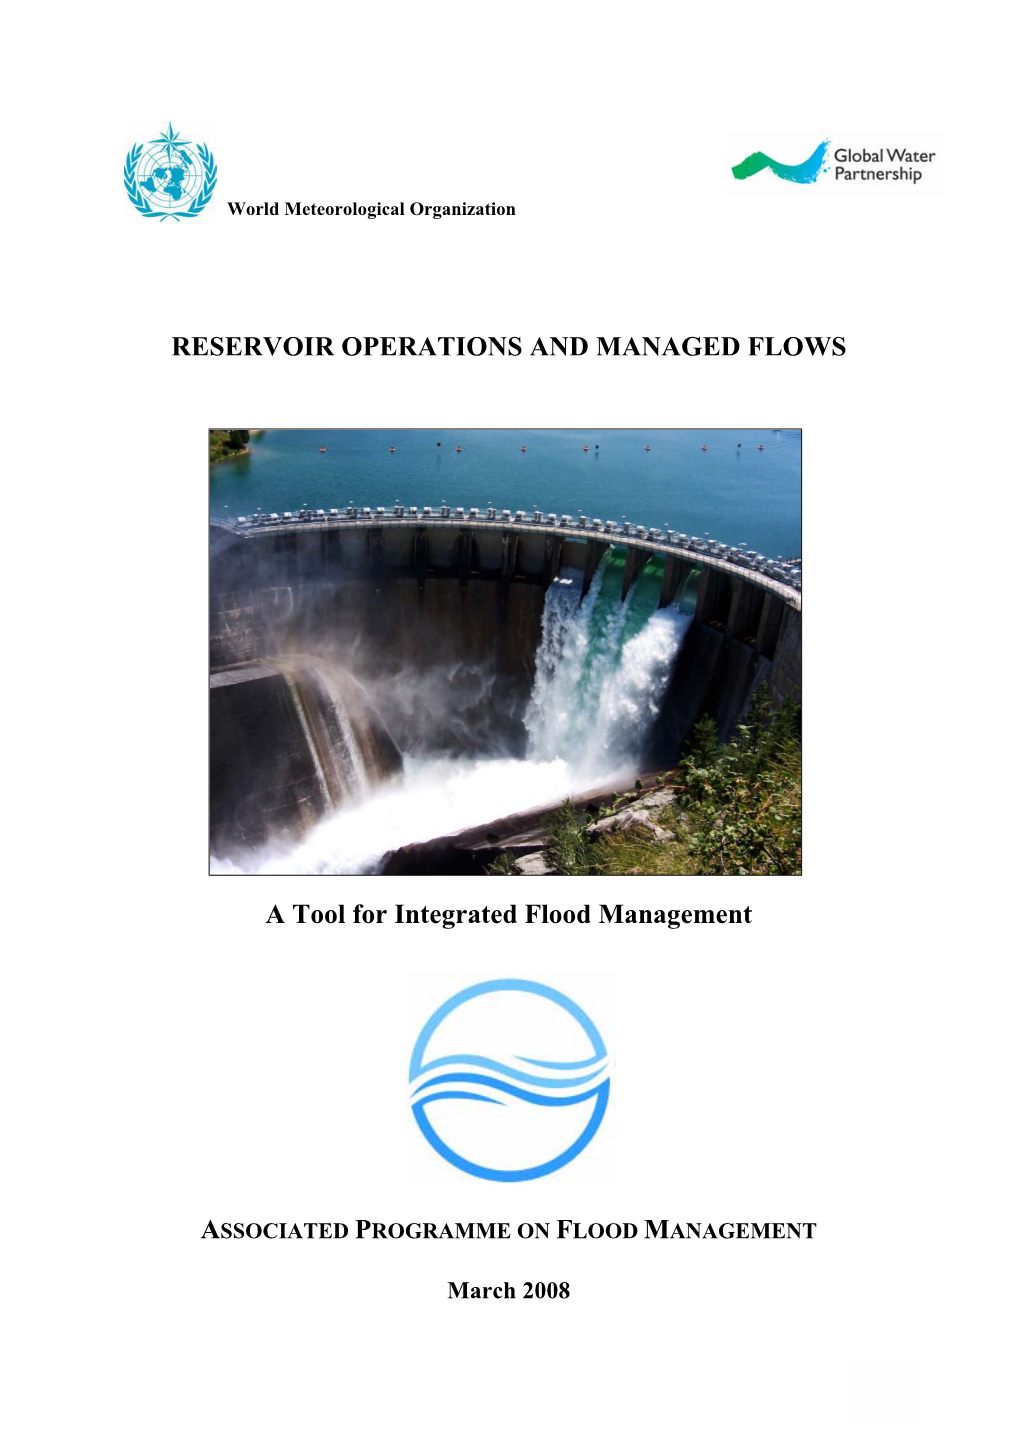 Flood Reservoir Operations and Managed Flows